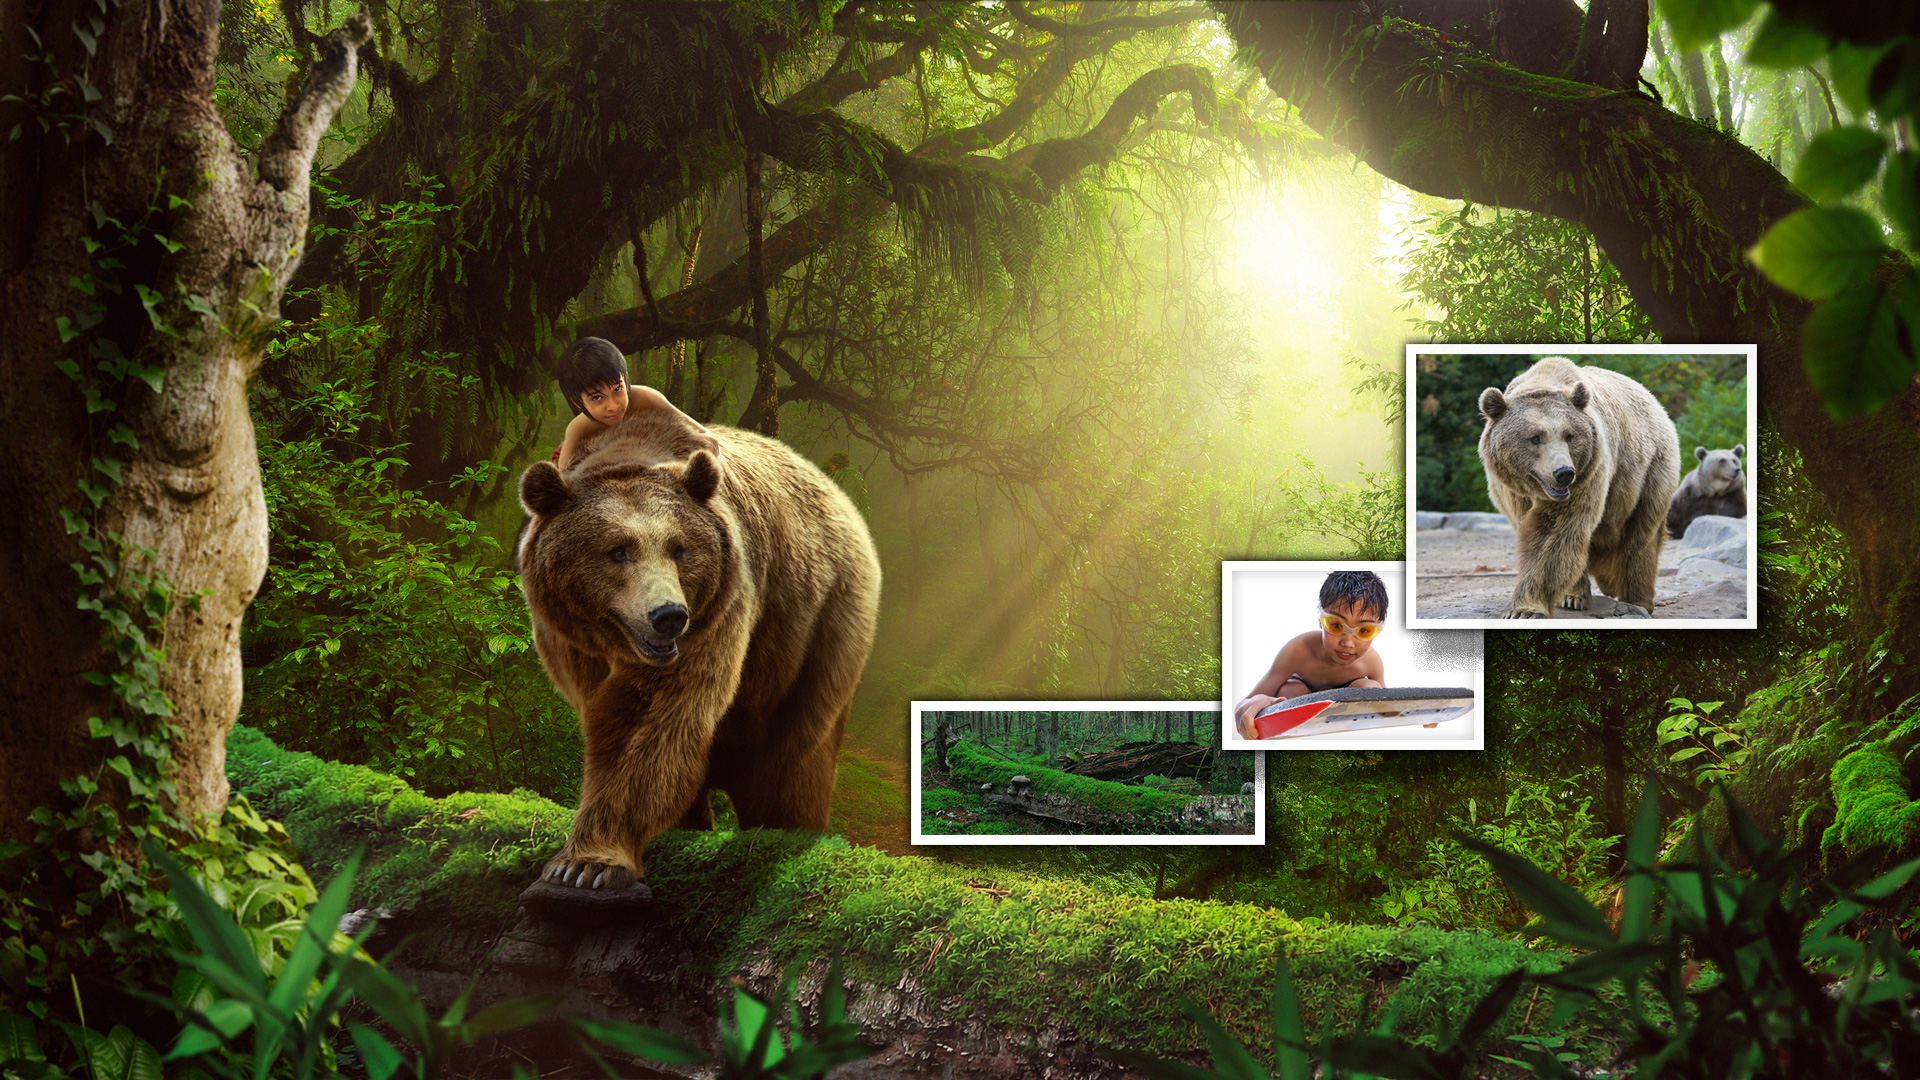 Photoshop Compositing Made Easy